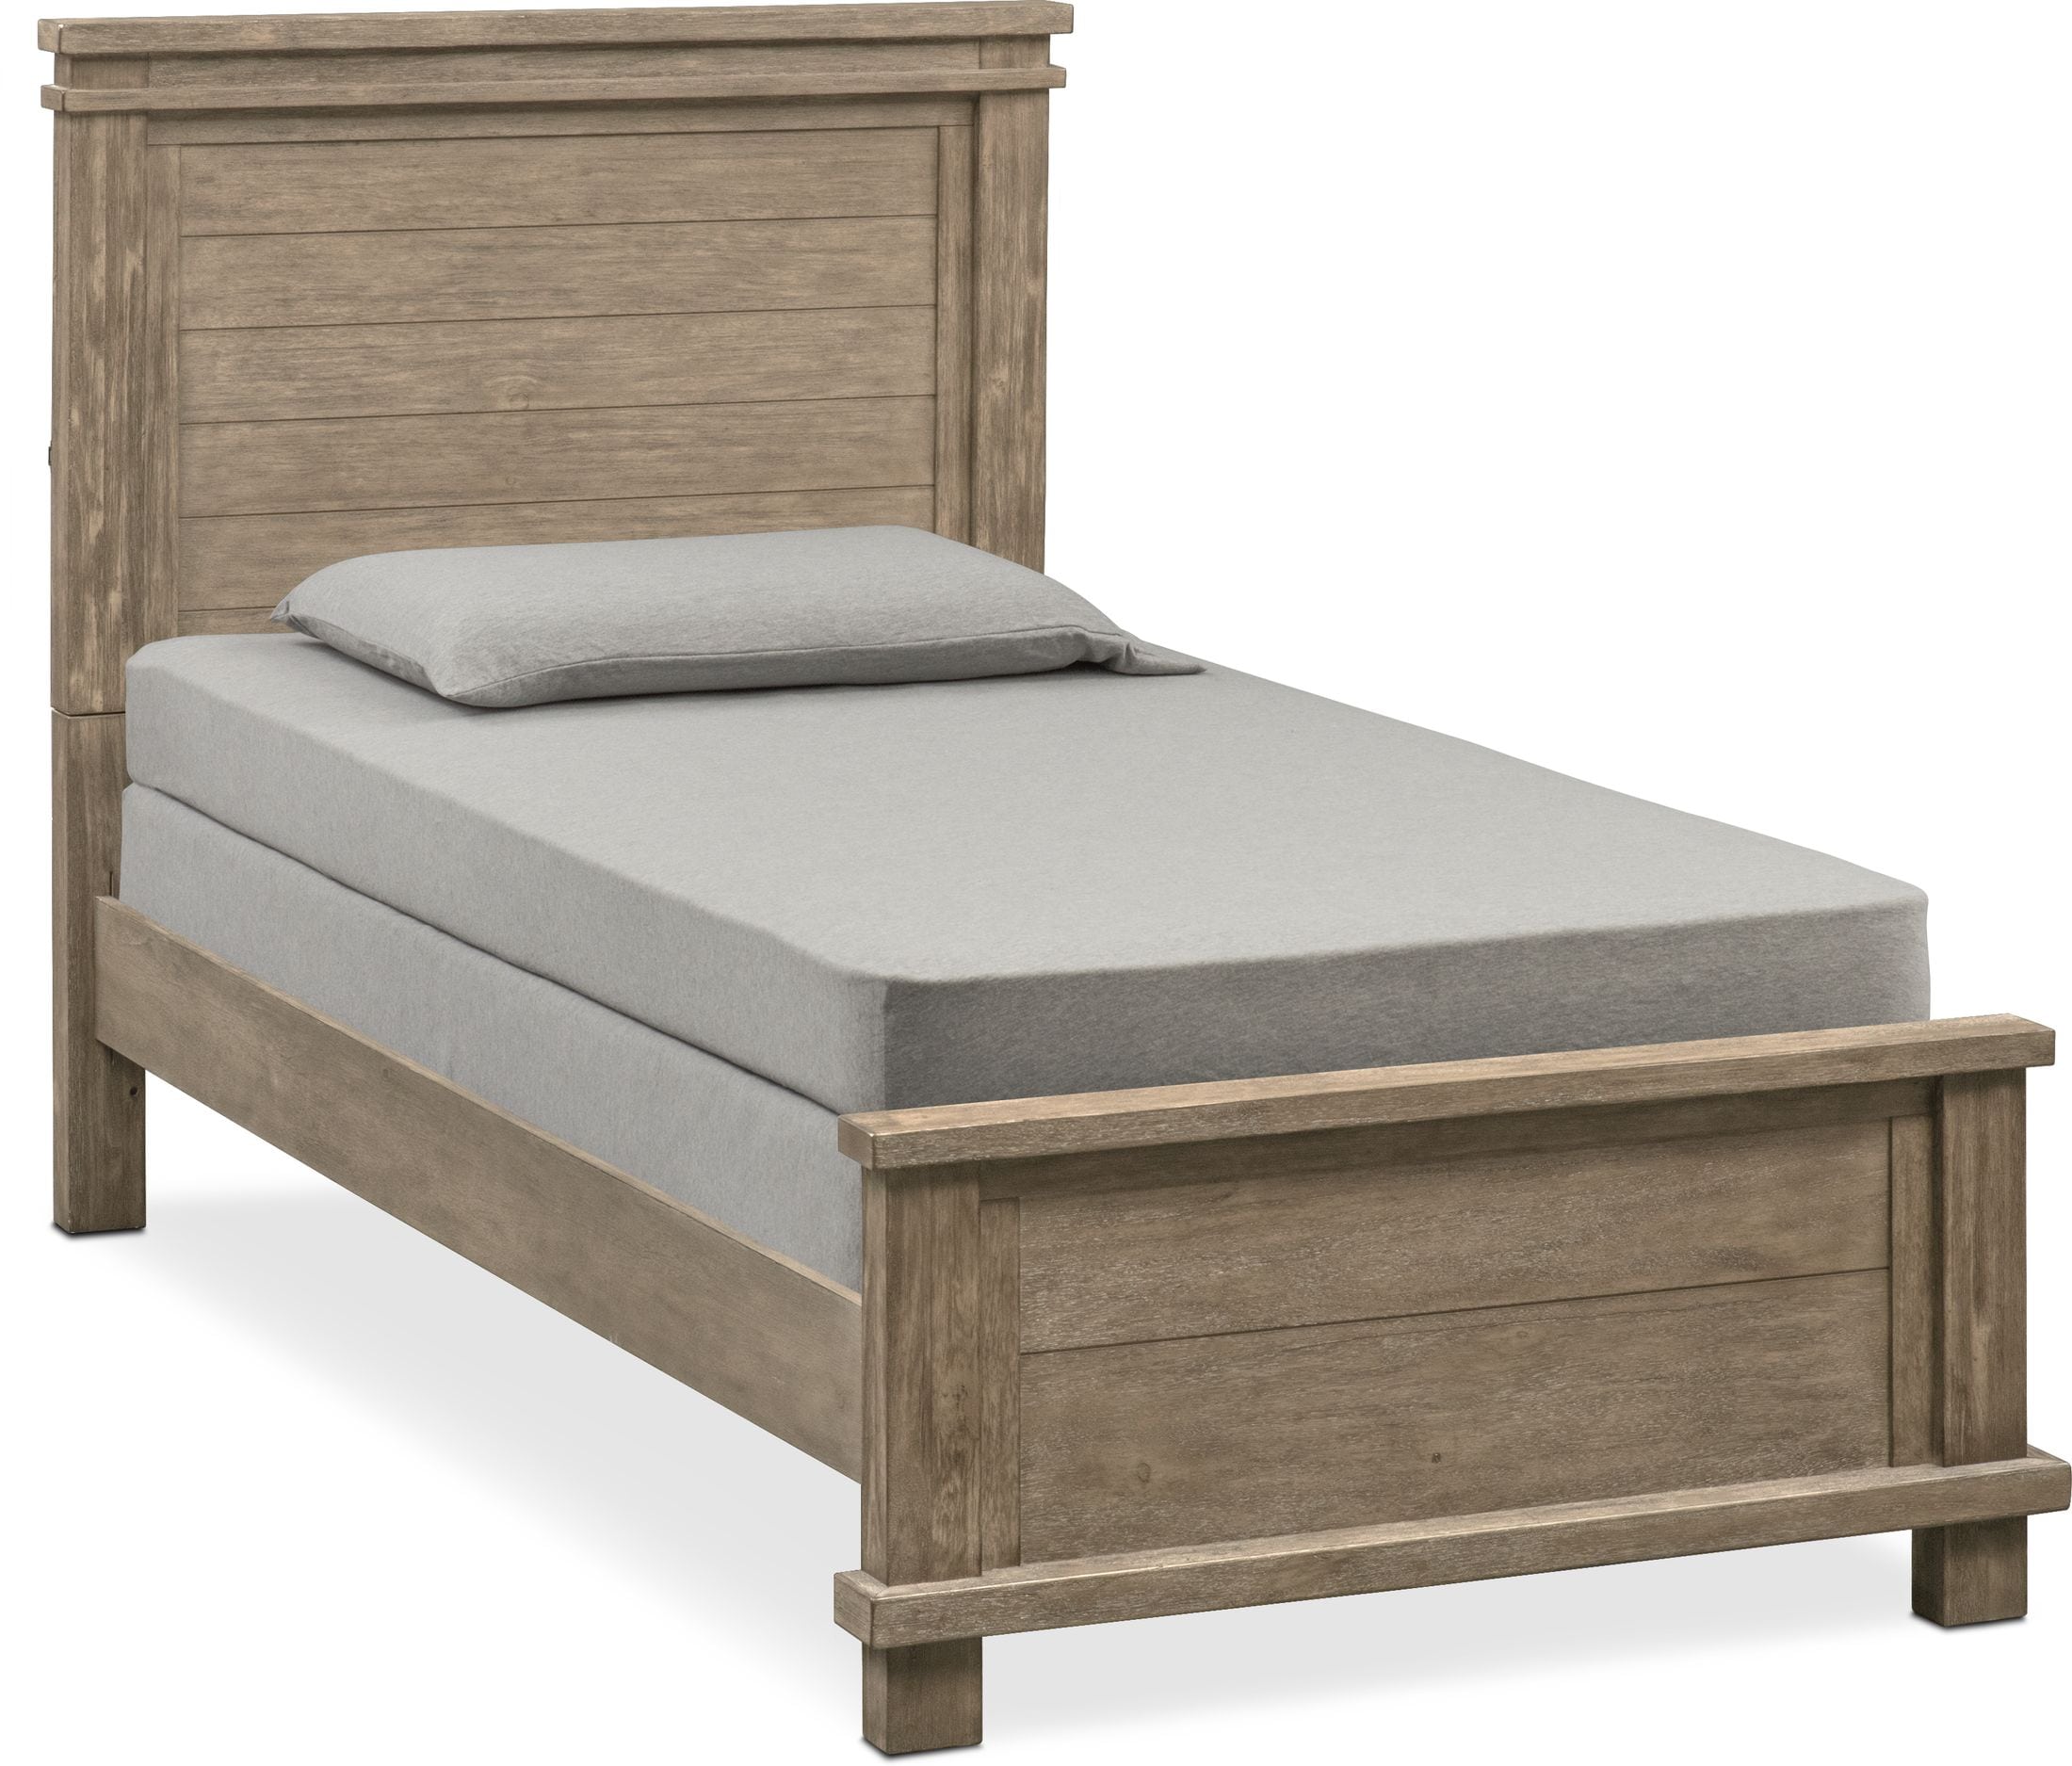 value city girl beds